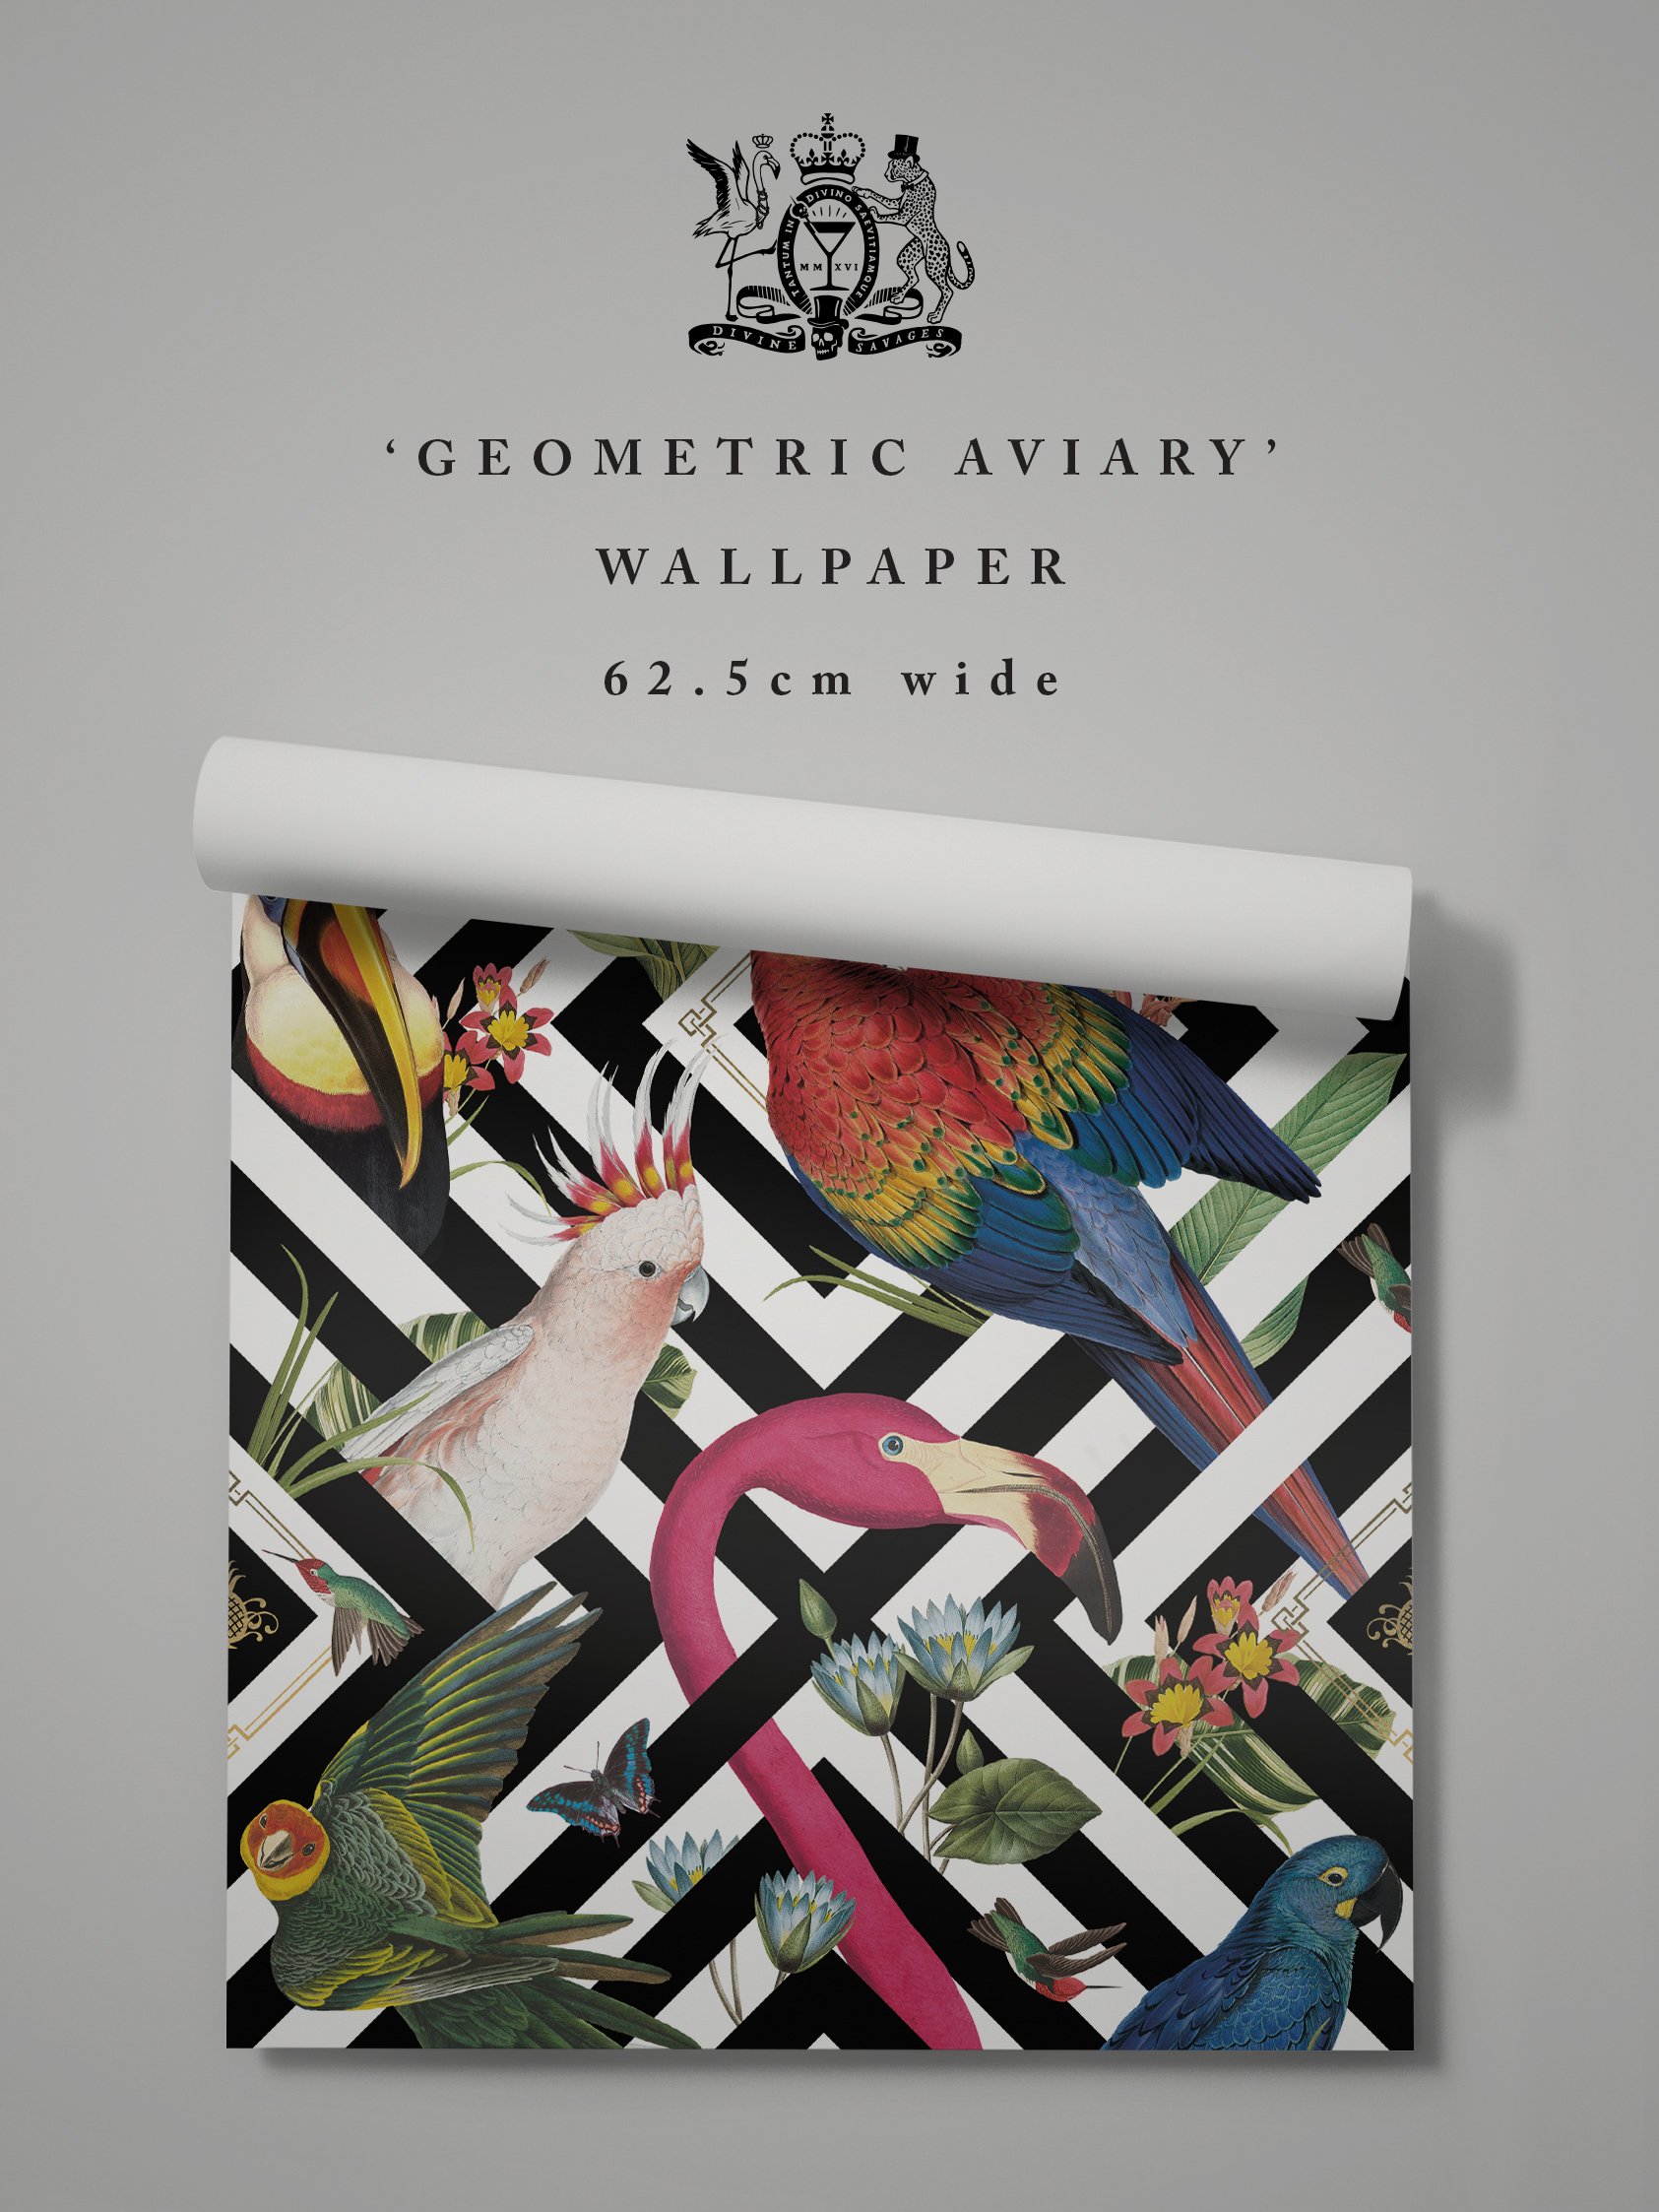 How Wide Is A Roll Of Wallpaper - Geometric Aviary , HD Wallpaper & Backgrounds